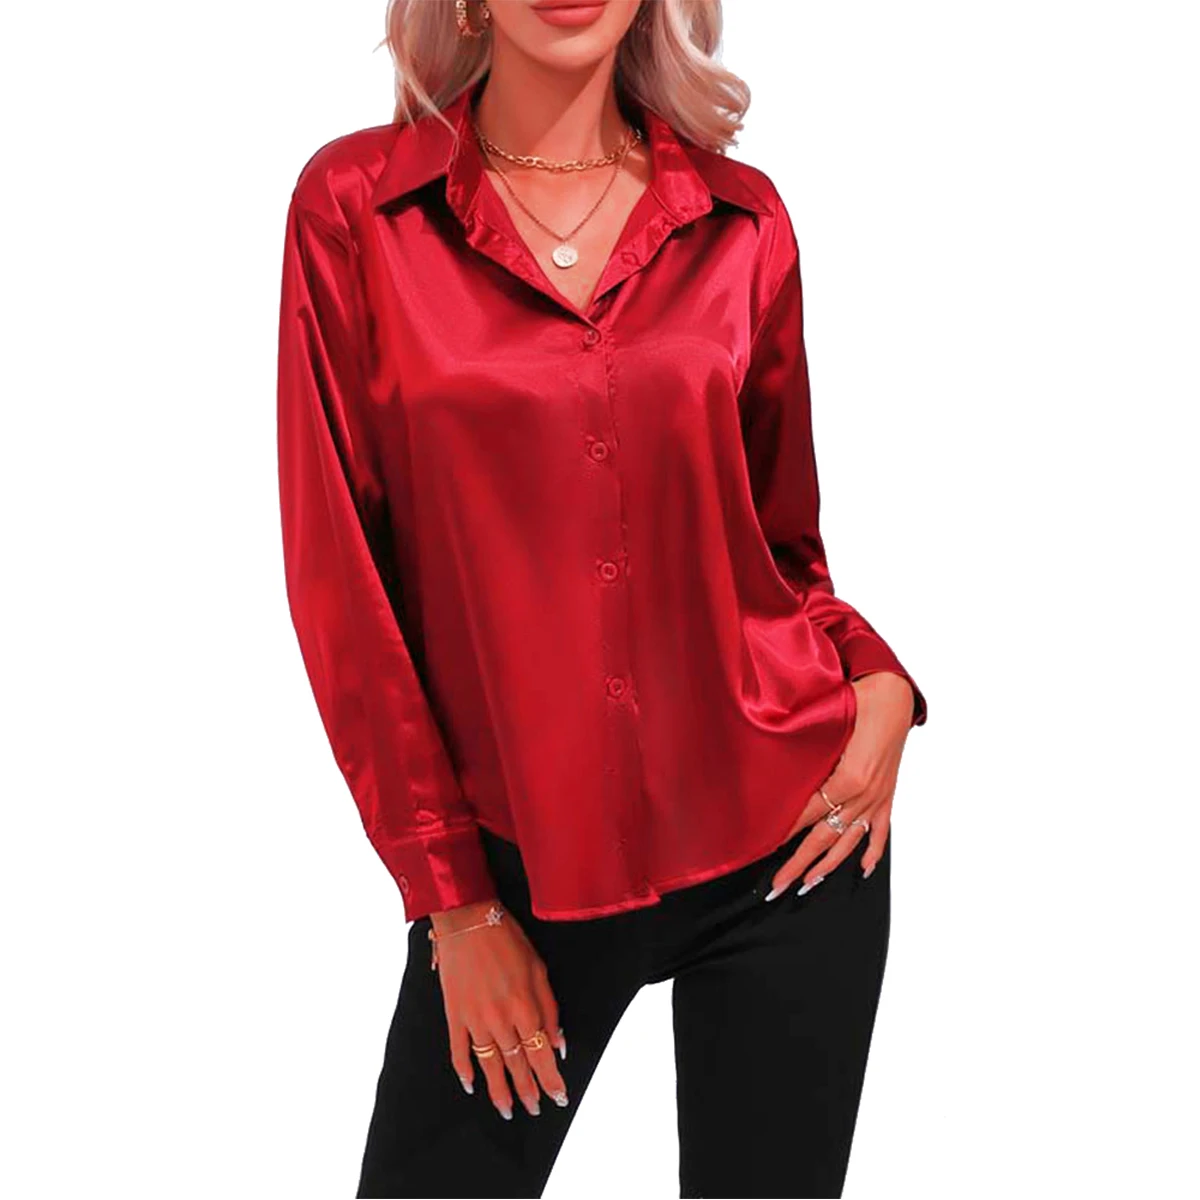 Oversize Women Shirts Silk Solid Plain Red White Black Green Blue Pink Yellow Purple Blouses Long Sleeve Tops Barry Wang